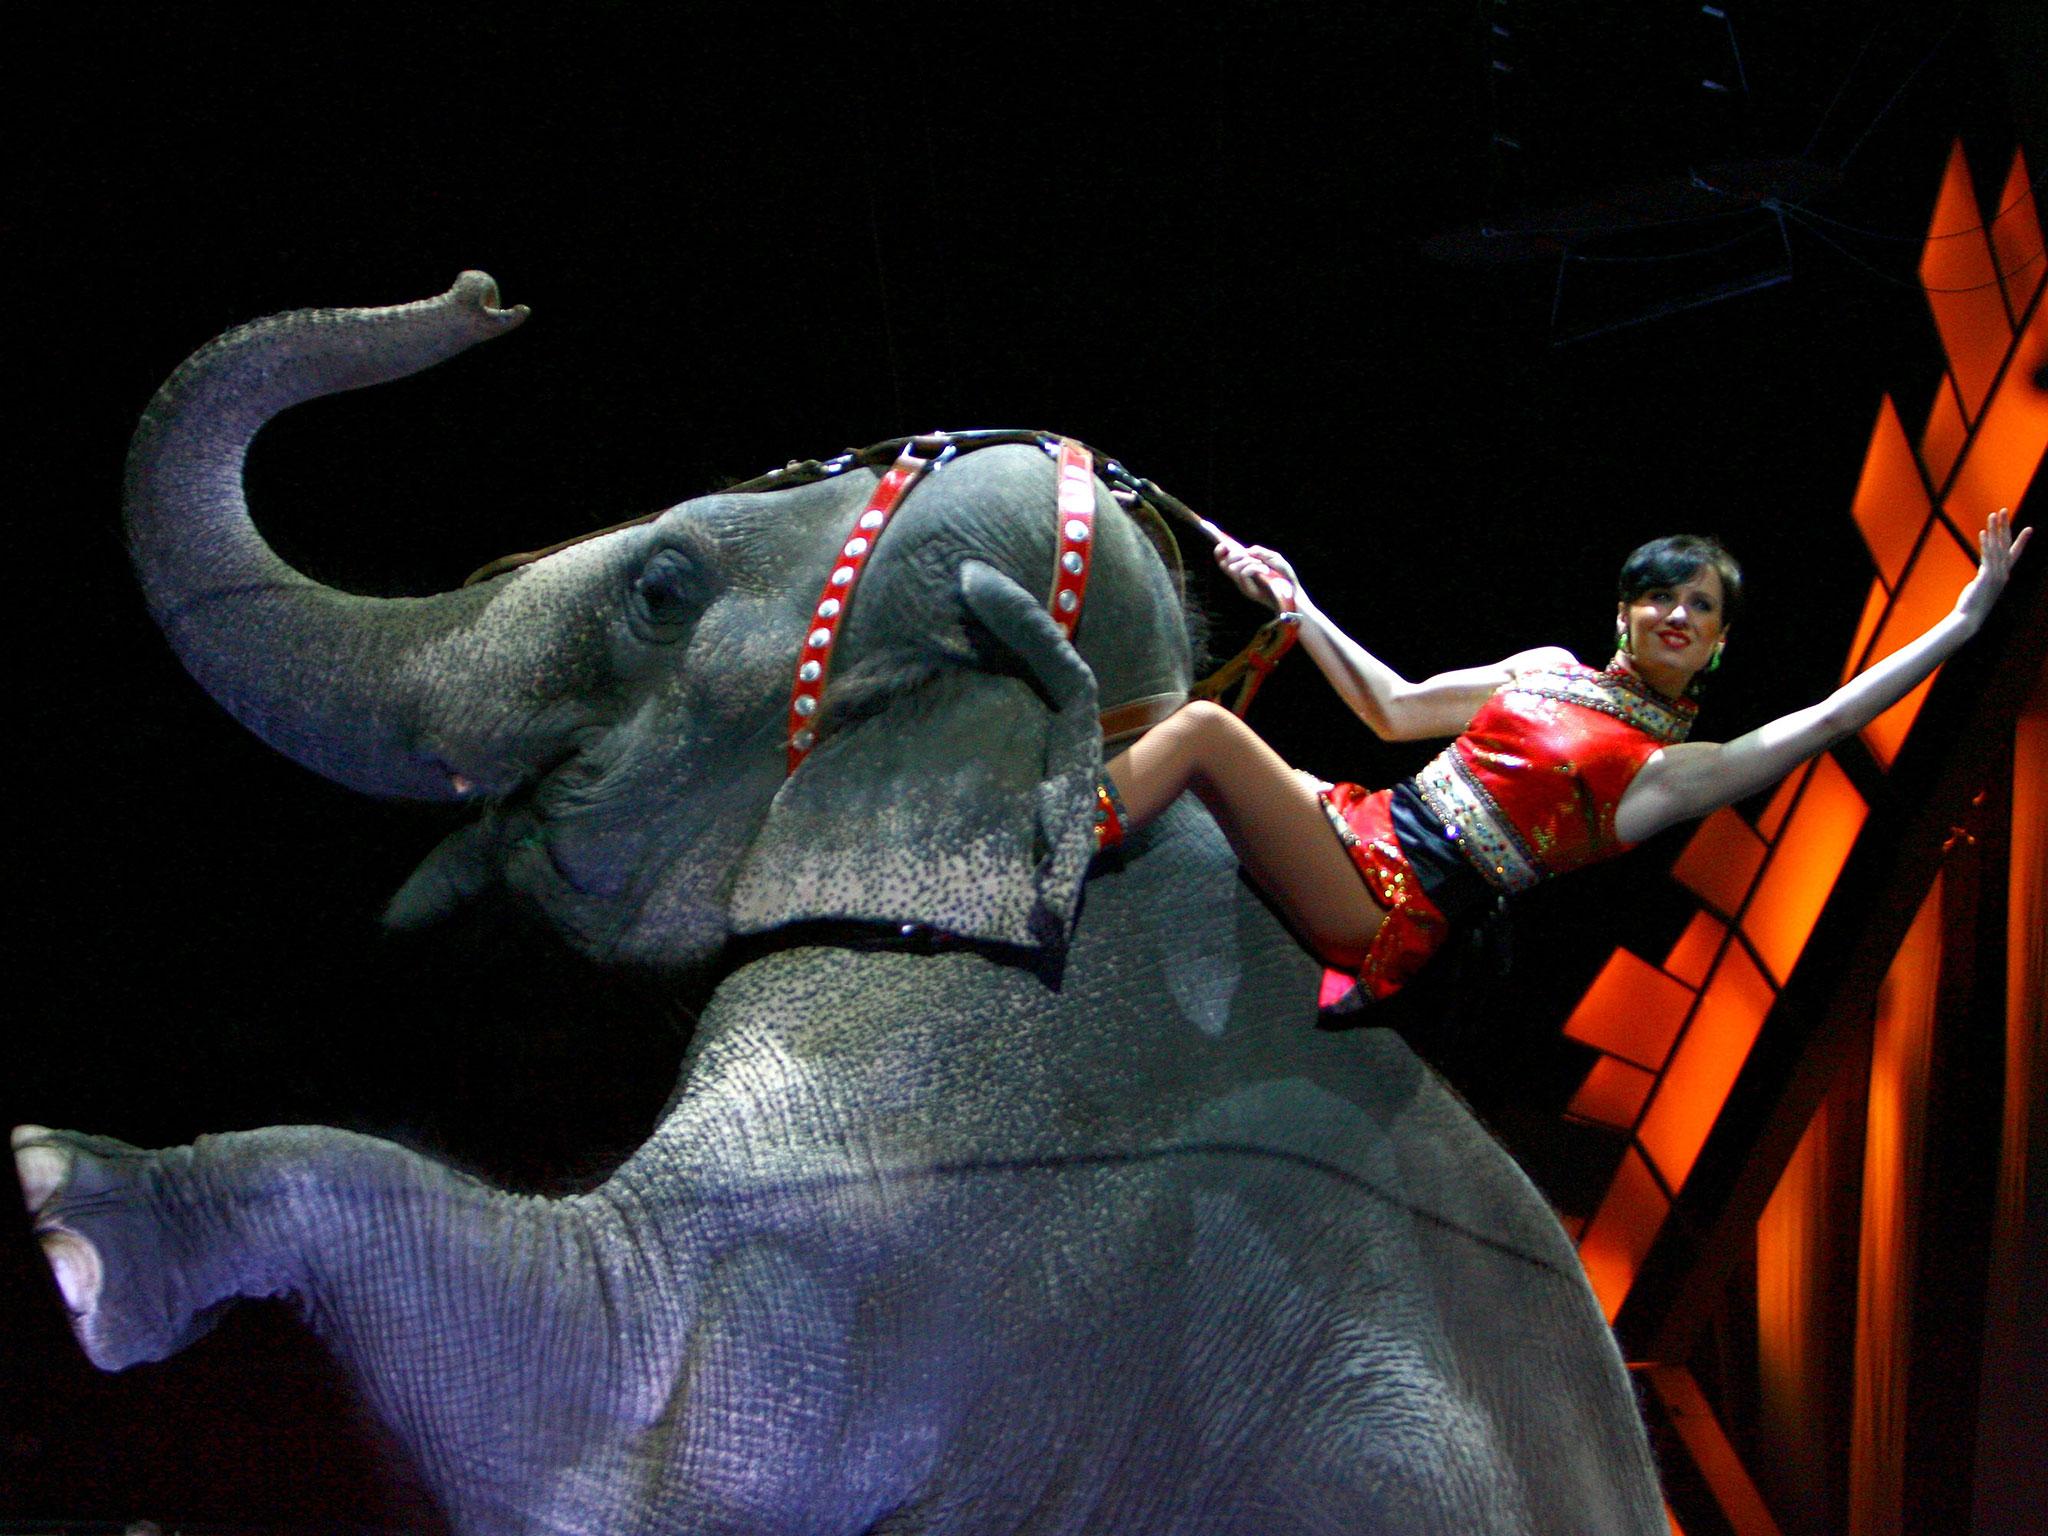 A performer rides an elephant during a live performance at Madison Square Garden in New York City